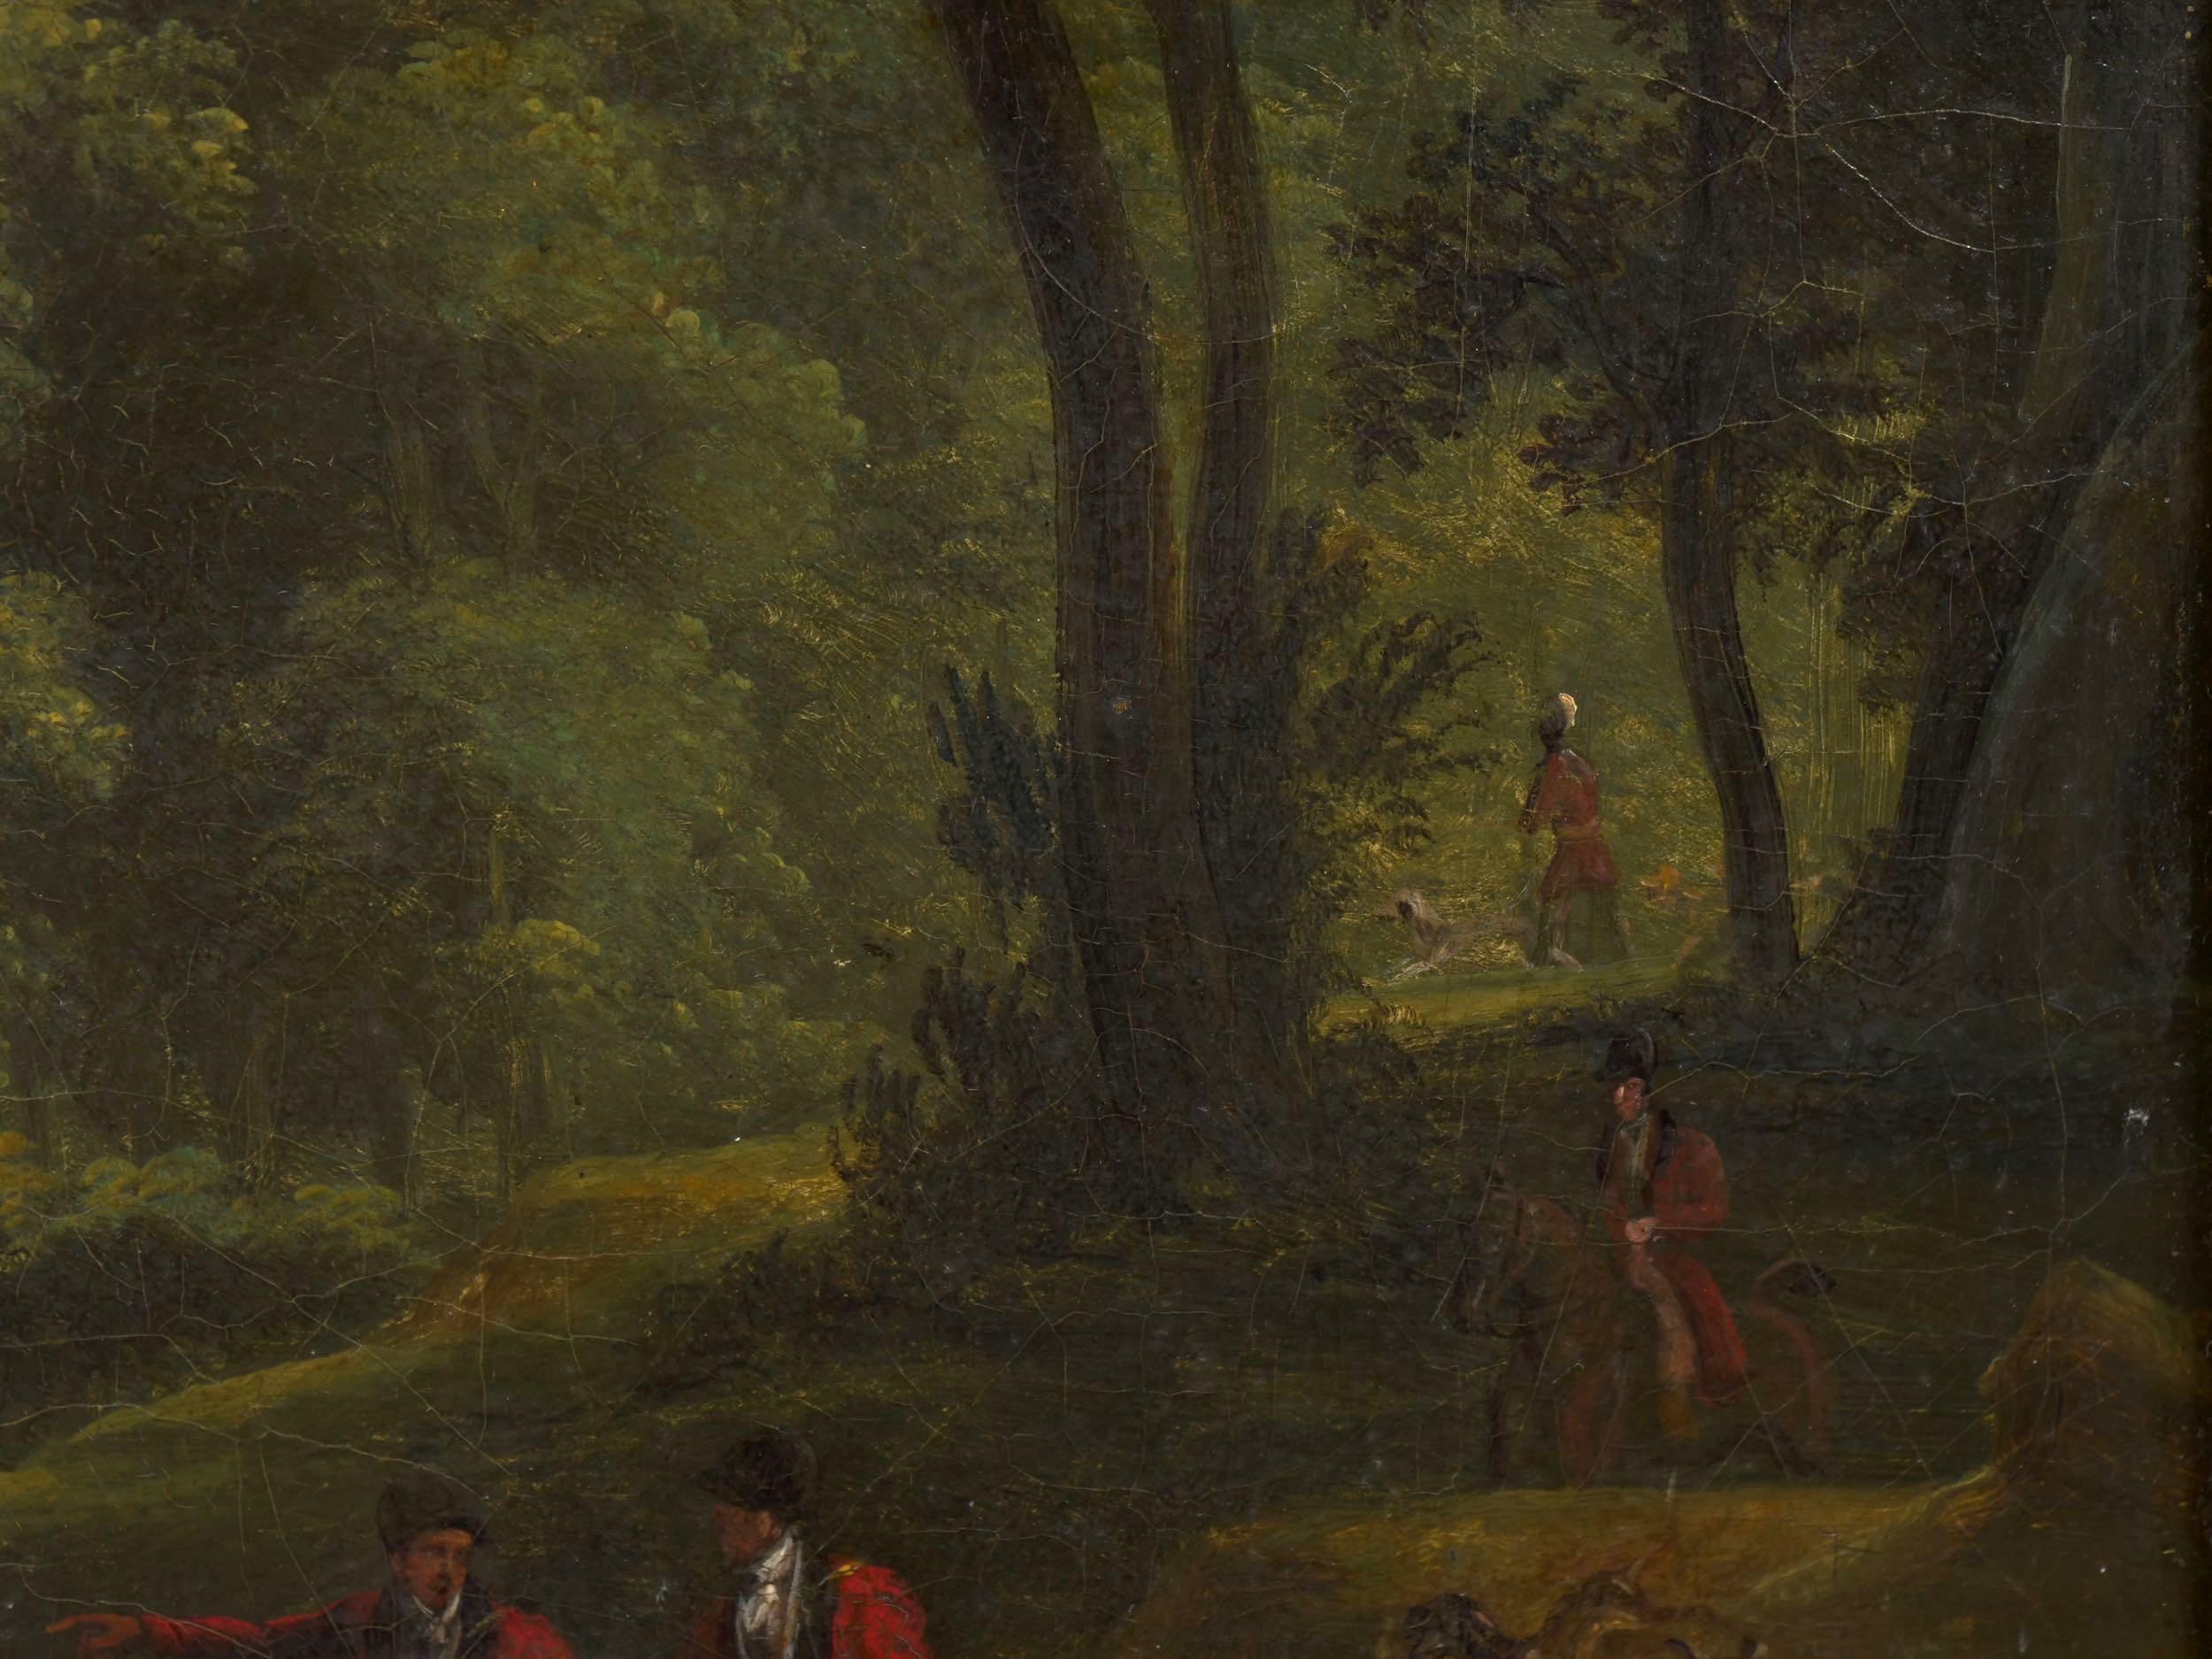 British School Antique Oil Landscape Painting of “A Hunting Party